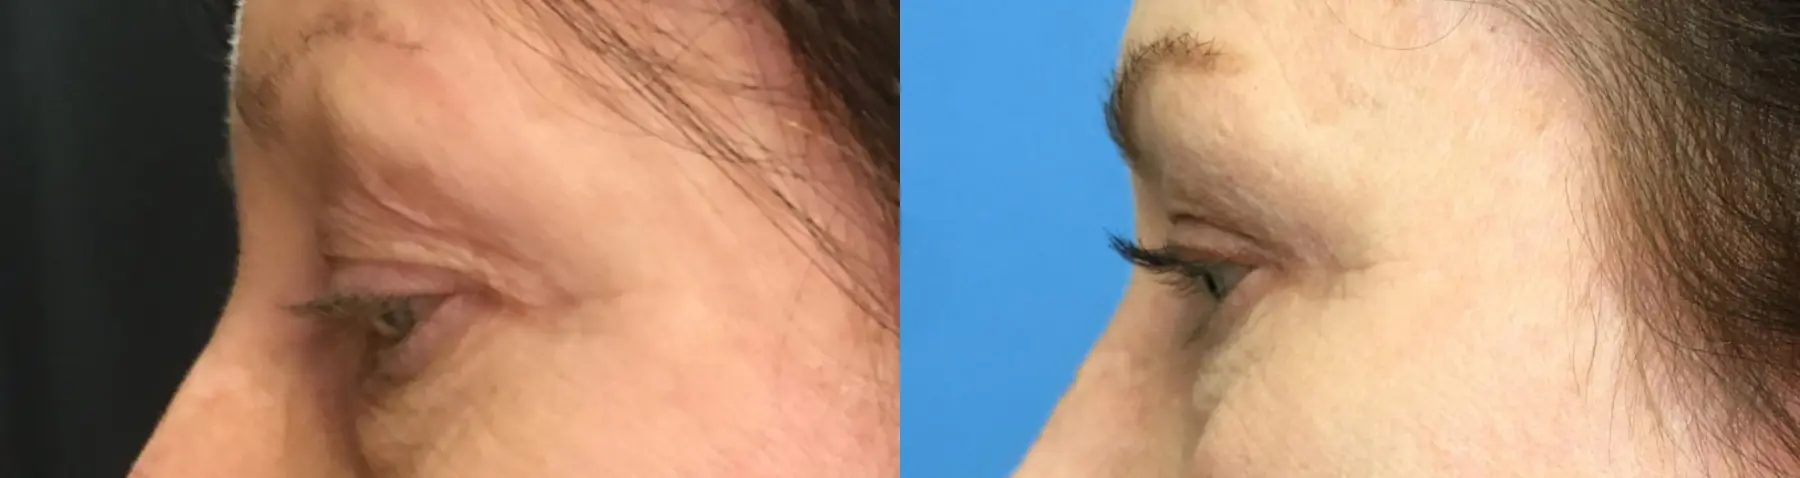 Eyelid Surgery: Patient 24 - Before and After 5